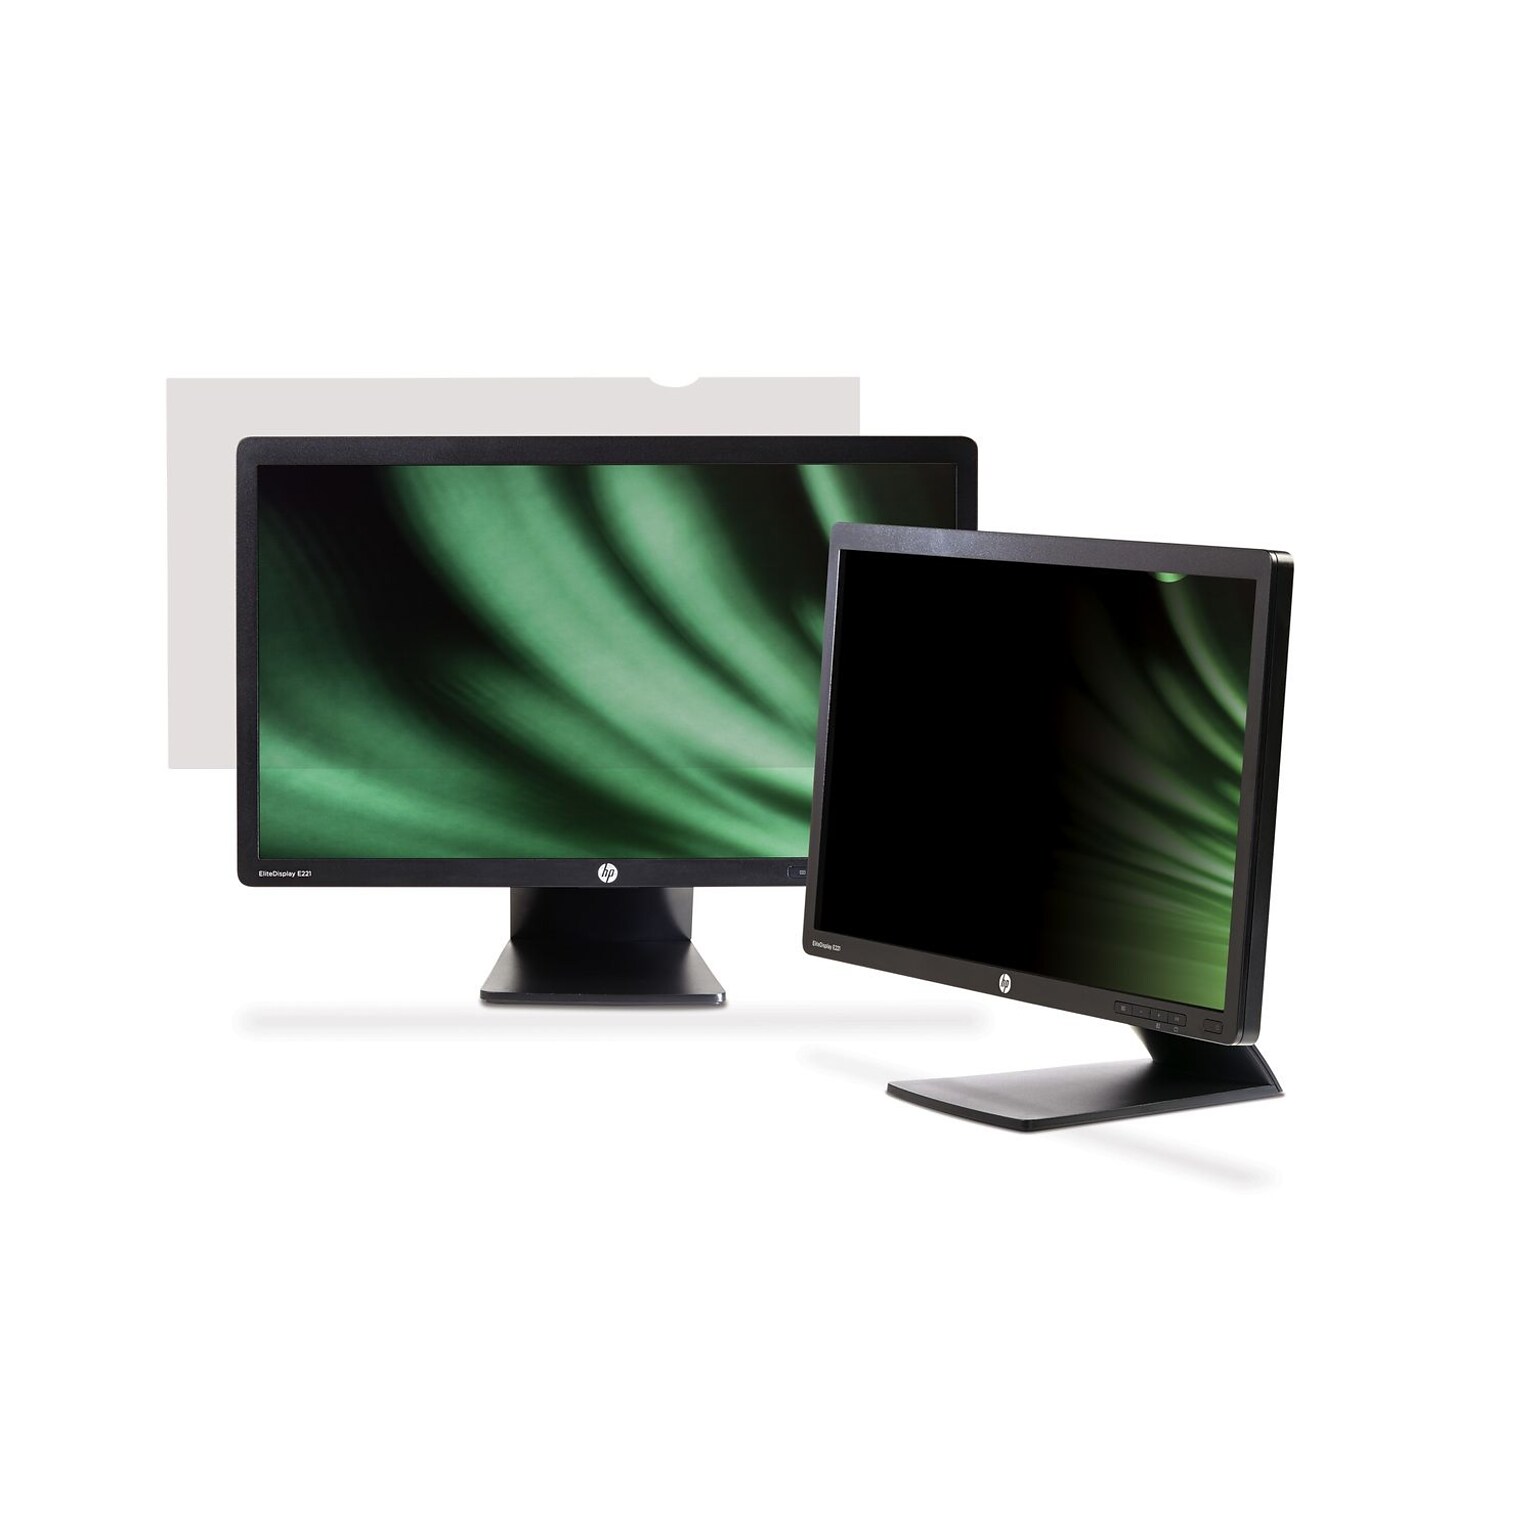 Monitor Widescreen Privacy Filter, Diagonal LCD Screen Size 22.0